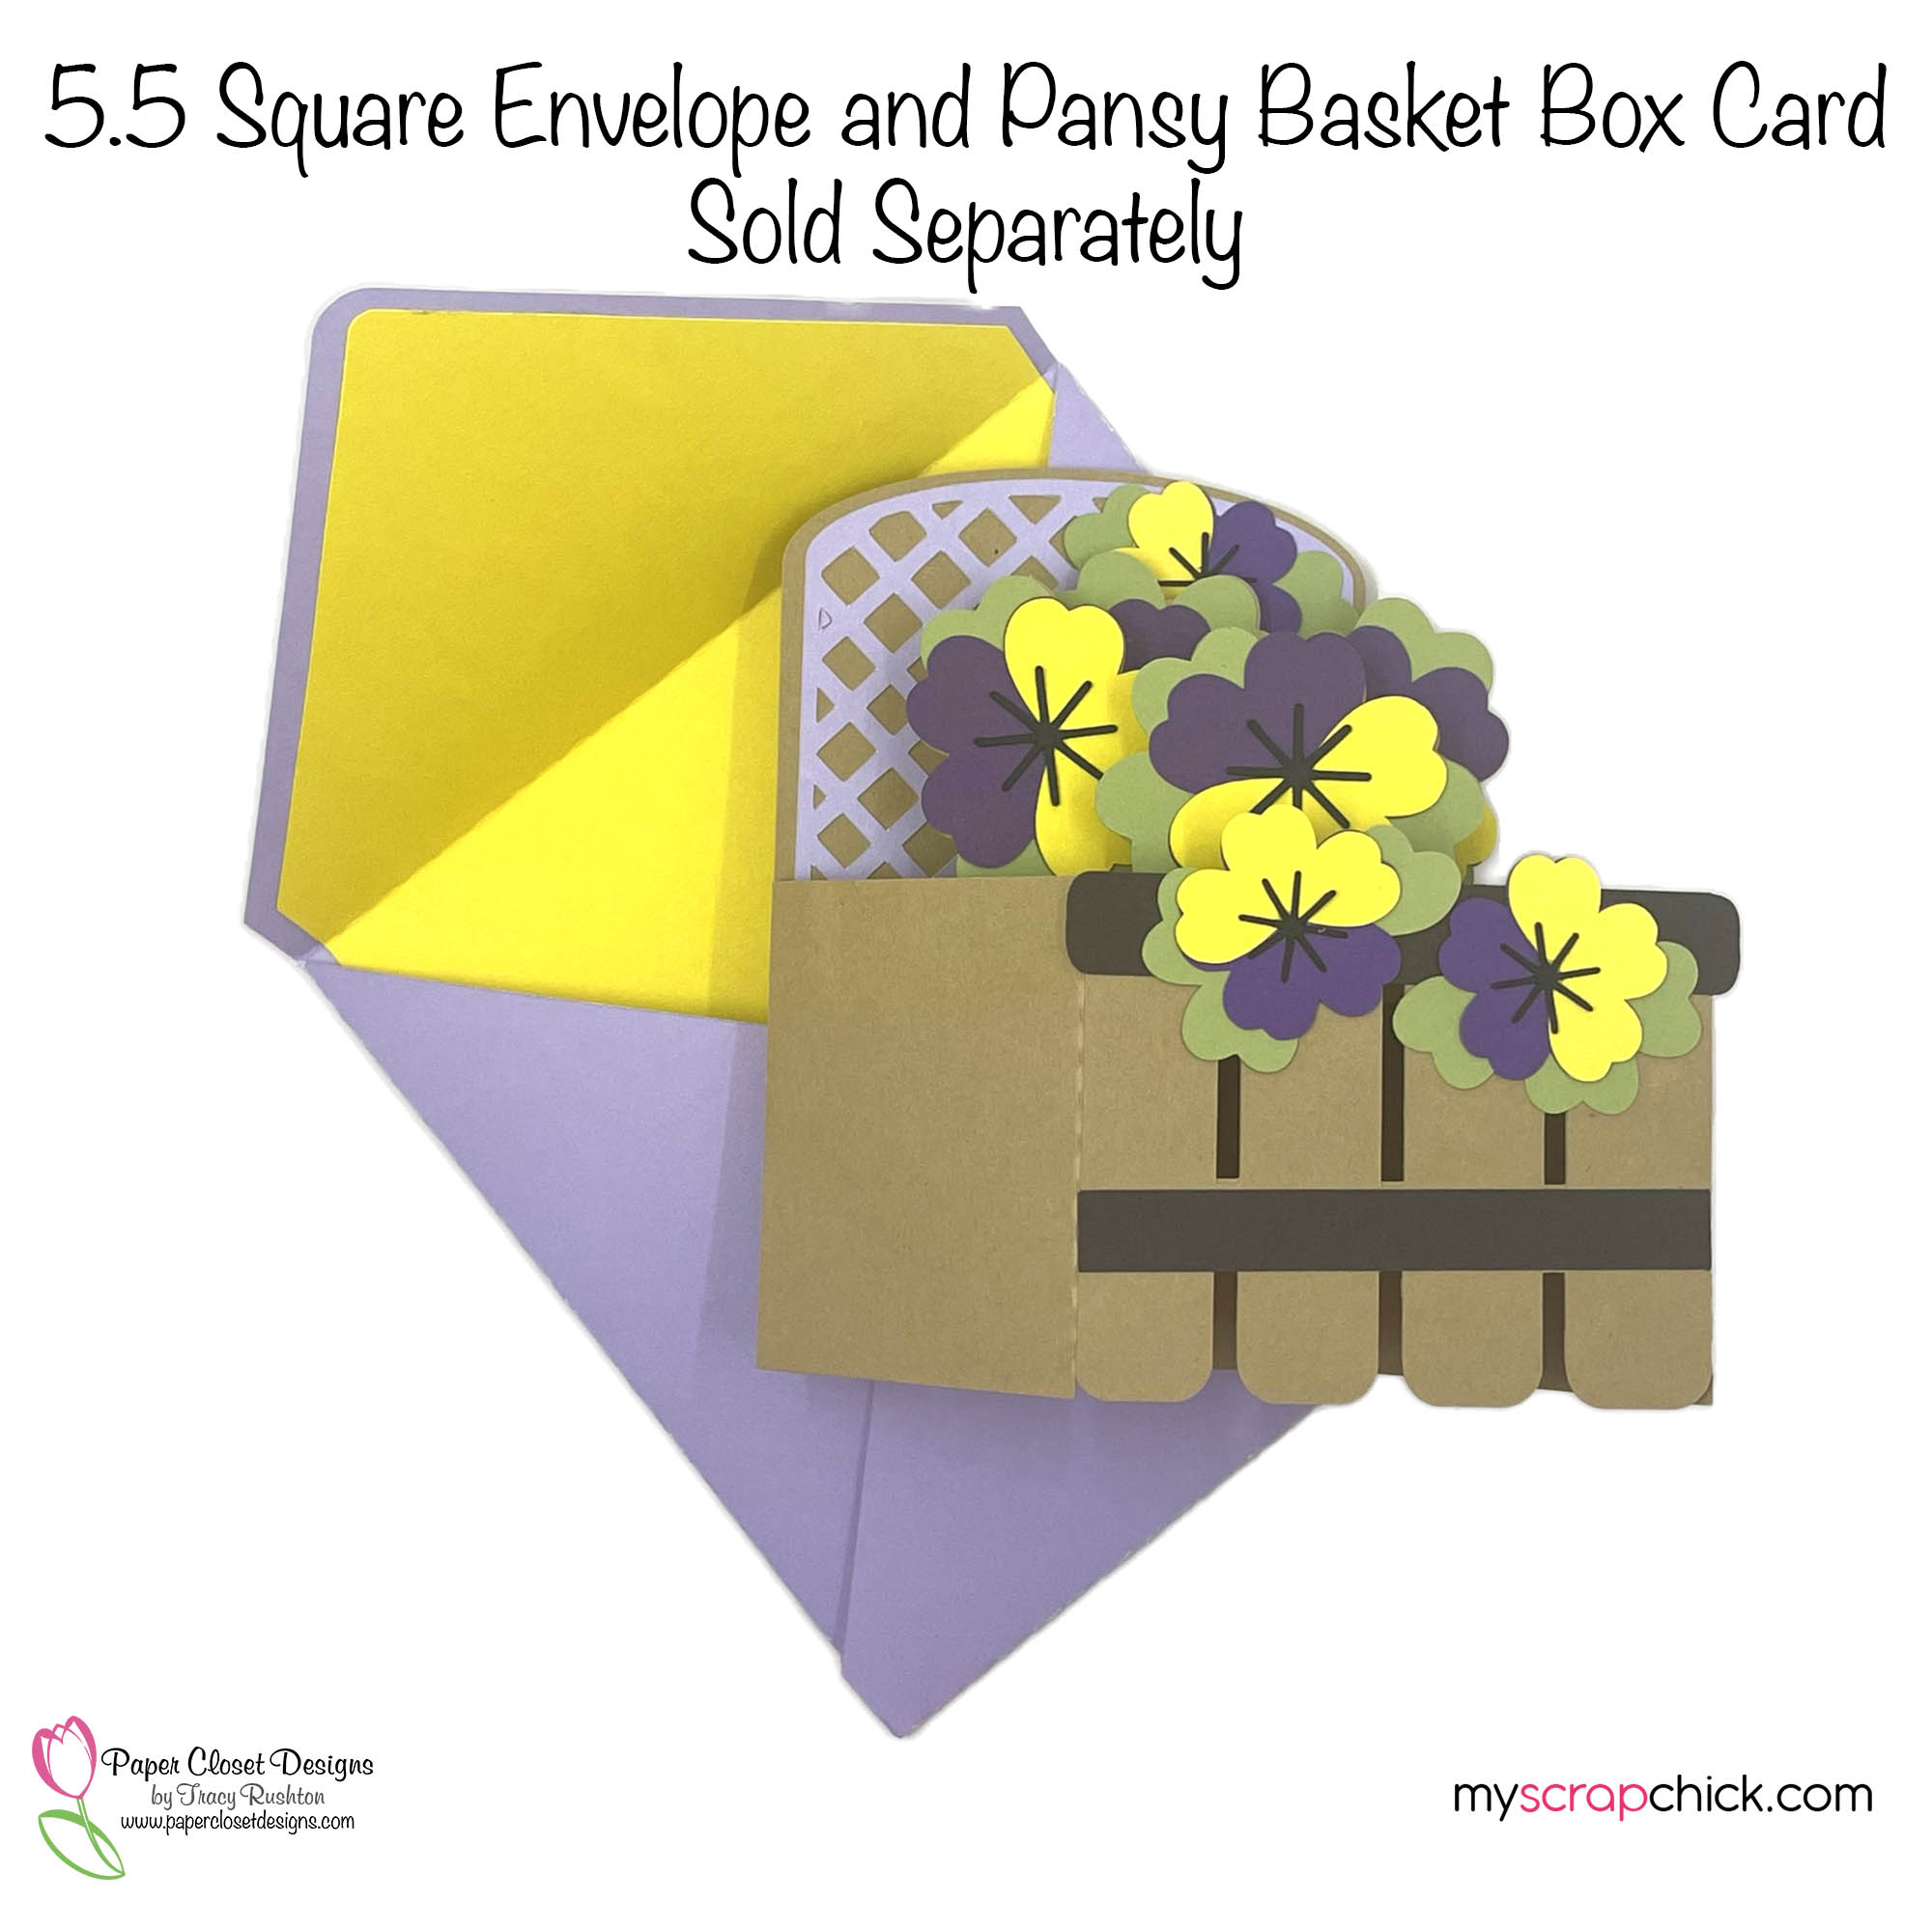 5.5 Square Envelope with Pansy Basket Box Card